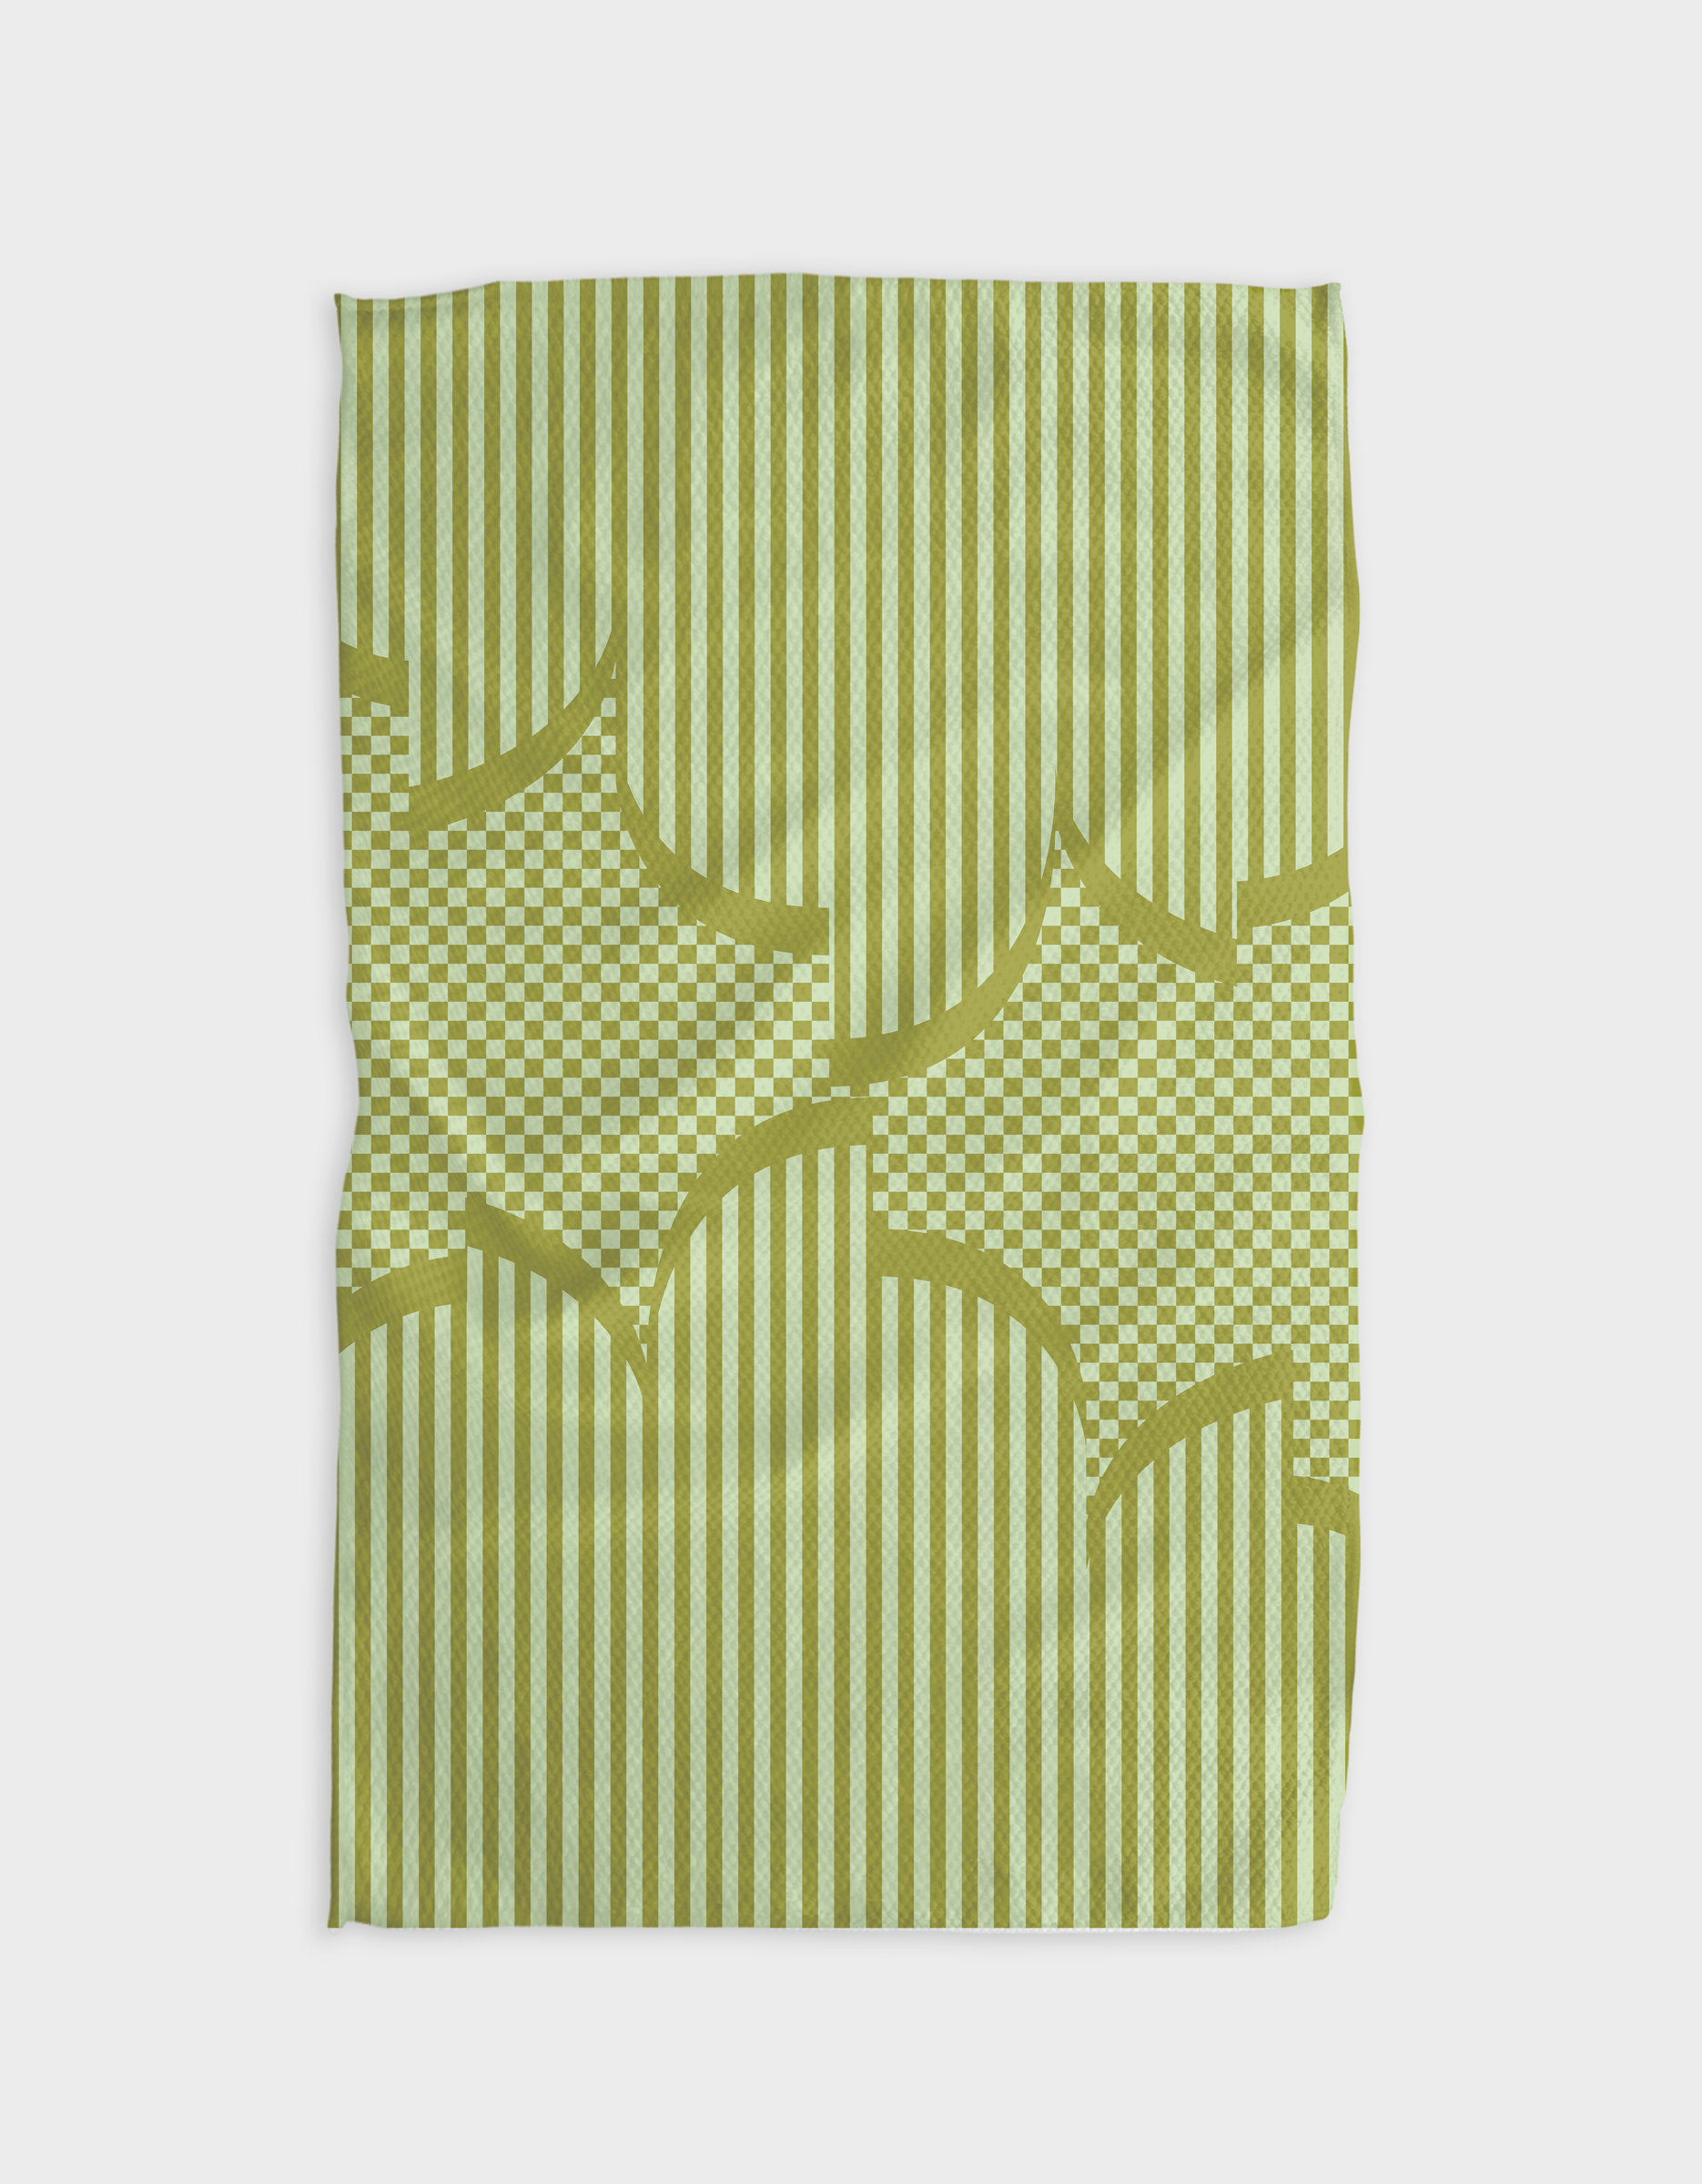 Geometry has such a great selection of napkins! From kitchen tea